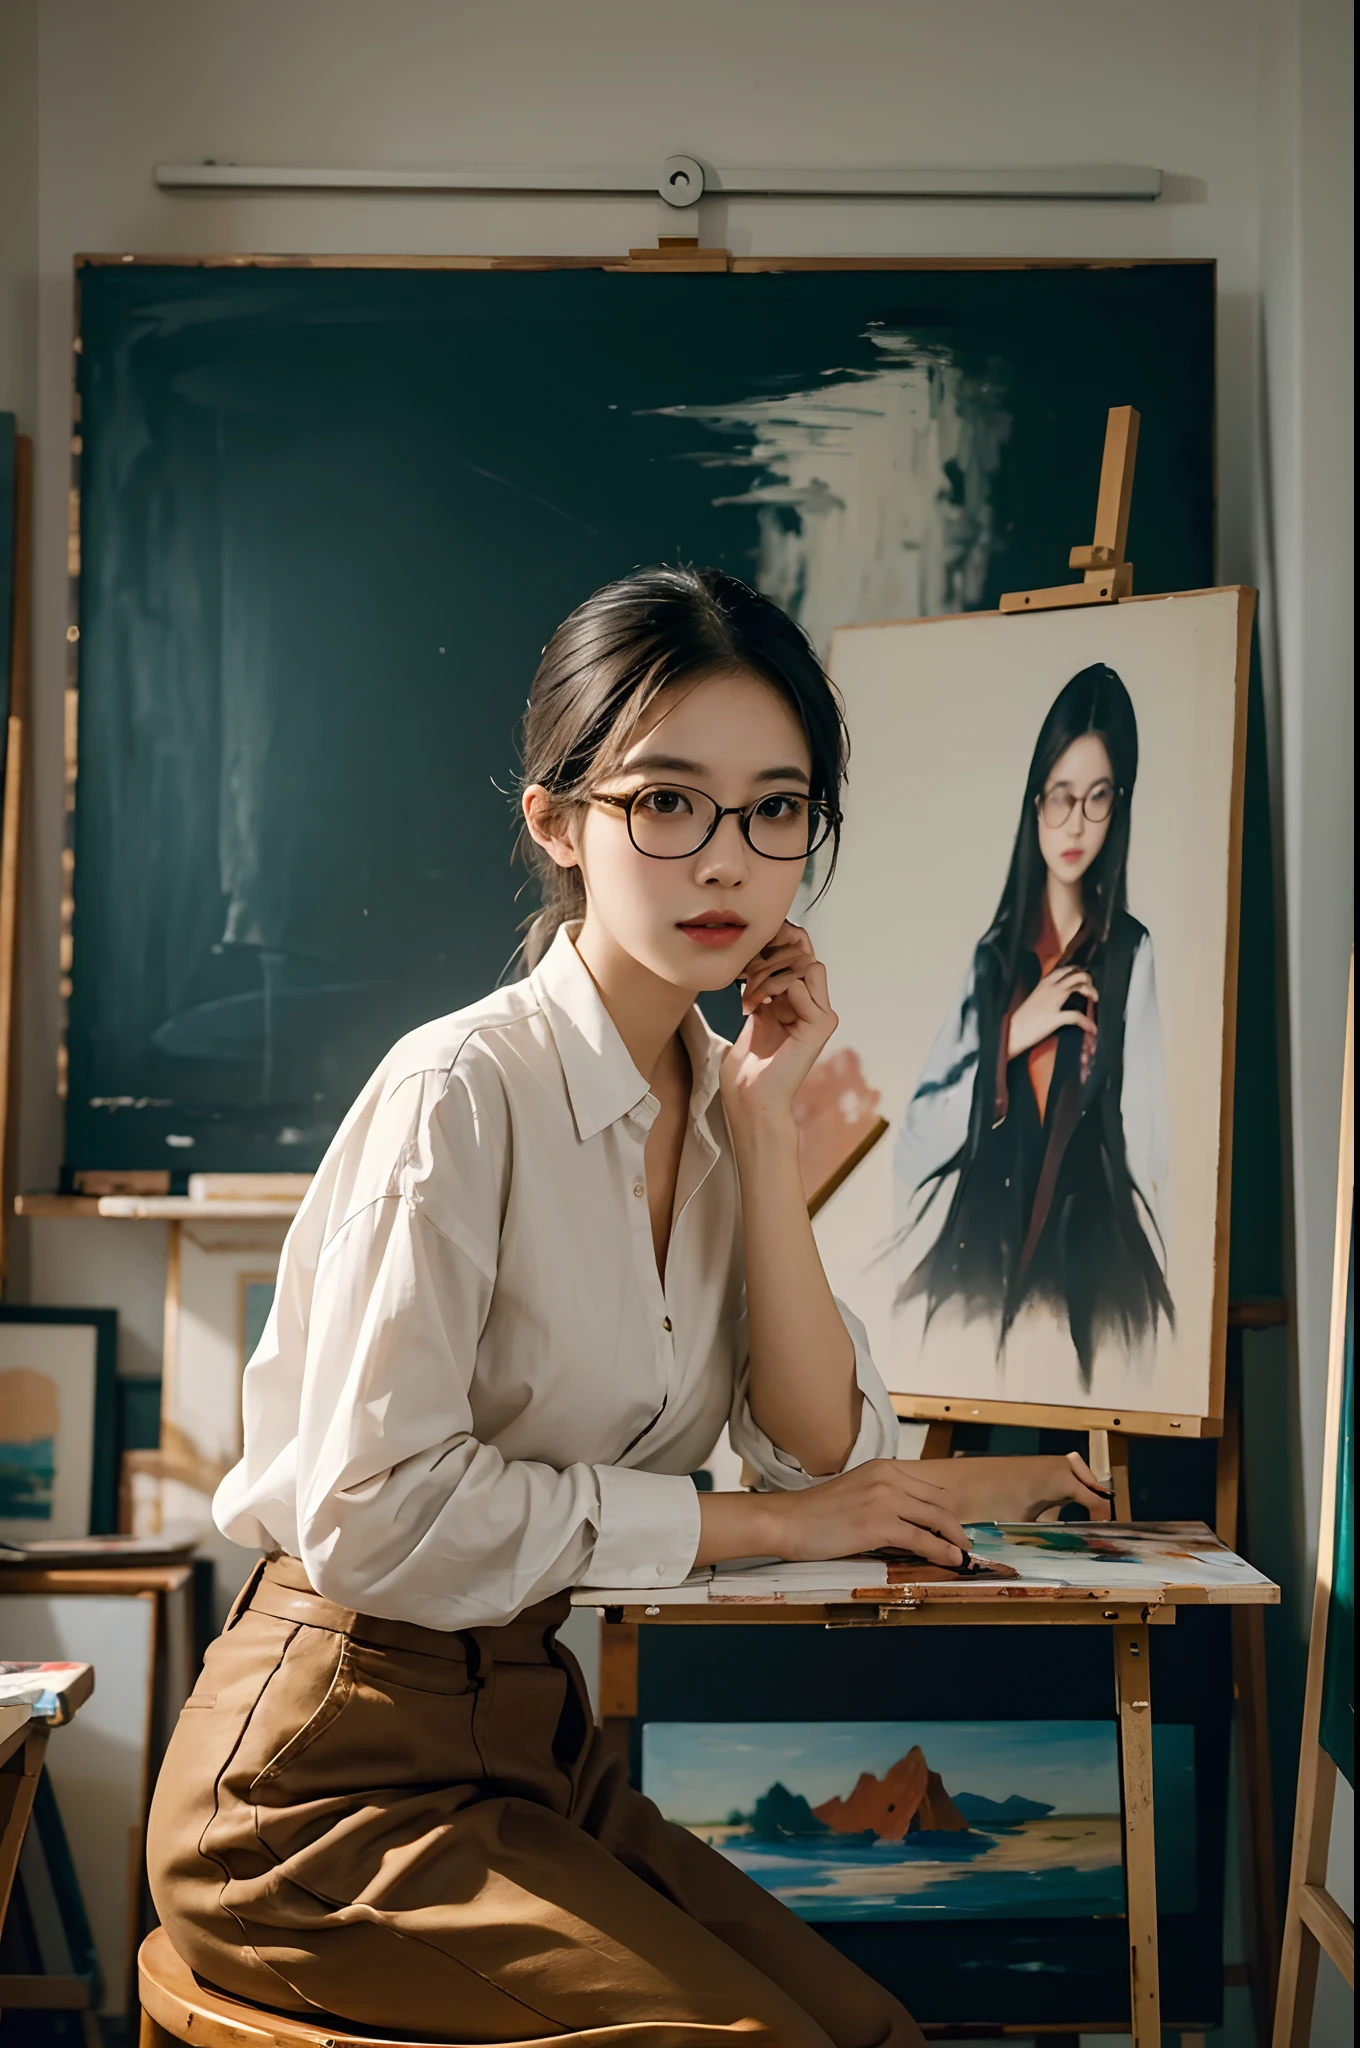 there is a woman sitting on a chair with a 絵画 on the easel, a fine art 絵画 inspired by Lin Liang, アートステーション, プロセスアート, 眼鏡をかけて, 眼鏡をかけて on, 彼女の美術室で, 美しいアジアの女の子, 絵画, 絵画, 厚いメガネ, 眼鏡をかけている, 韓国の女の子, 完全に服を着た. 絵画 of sexy, オタクっぽい外見